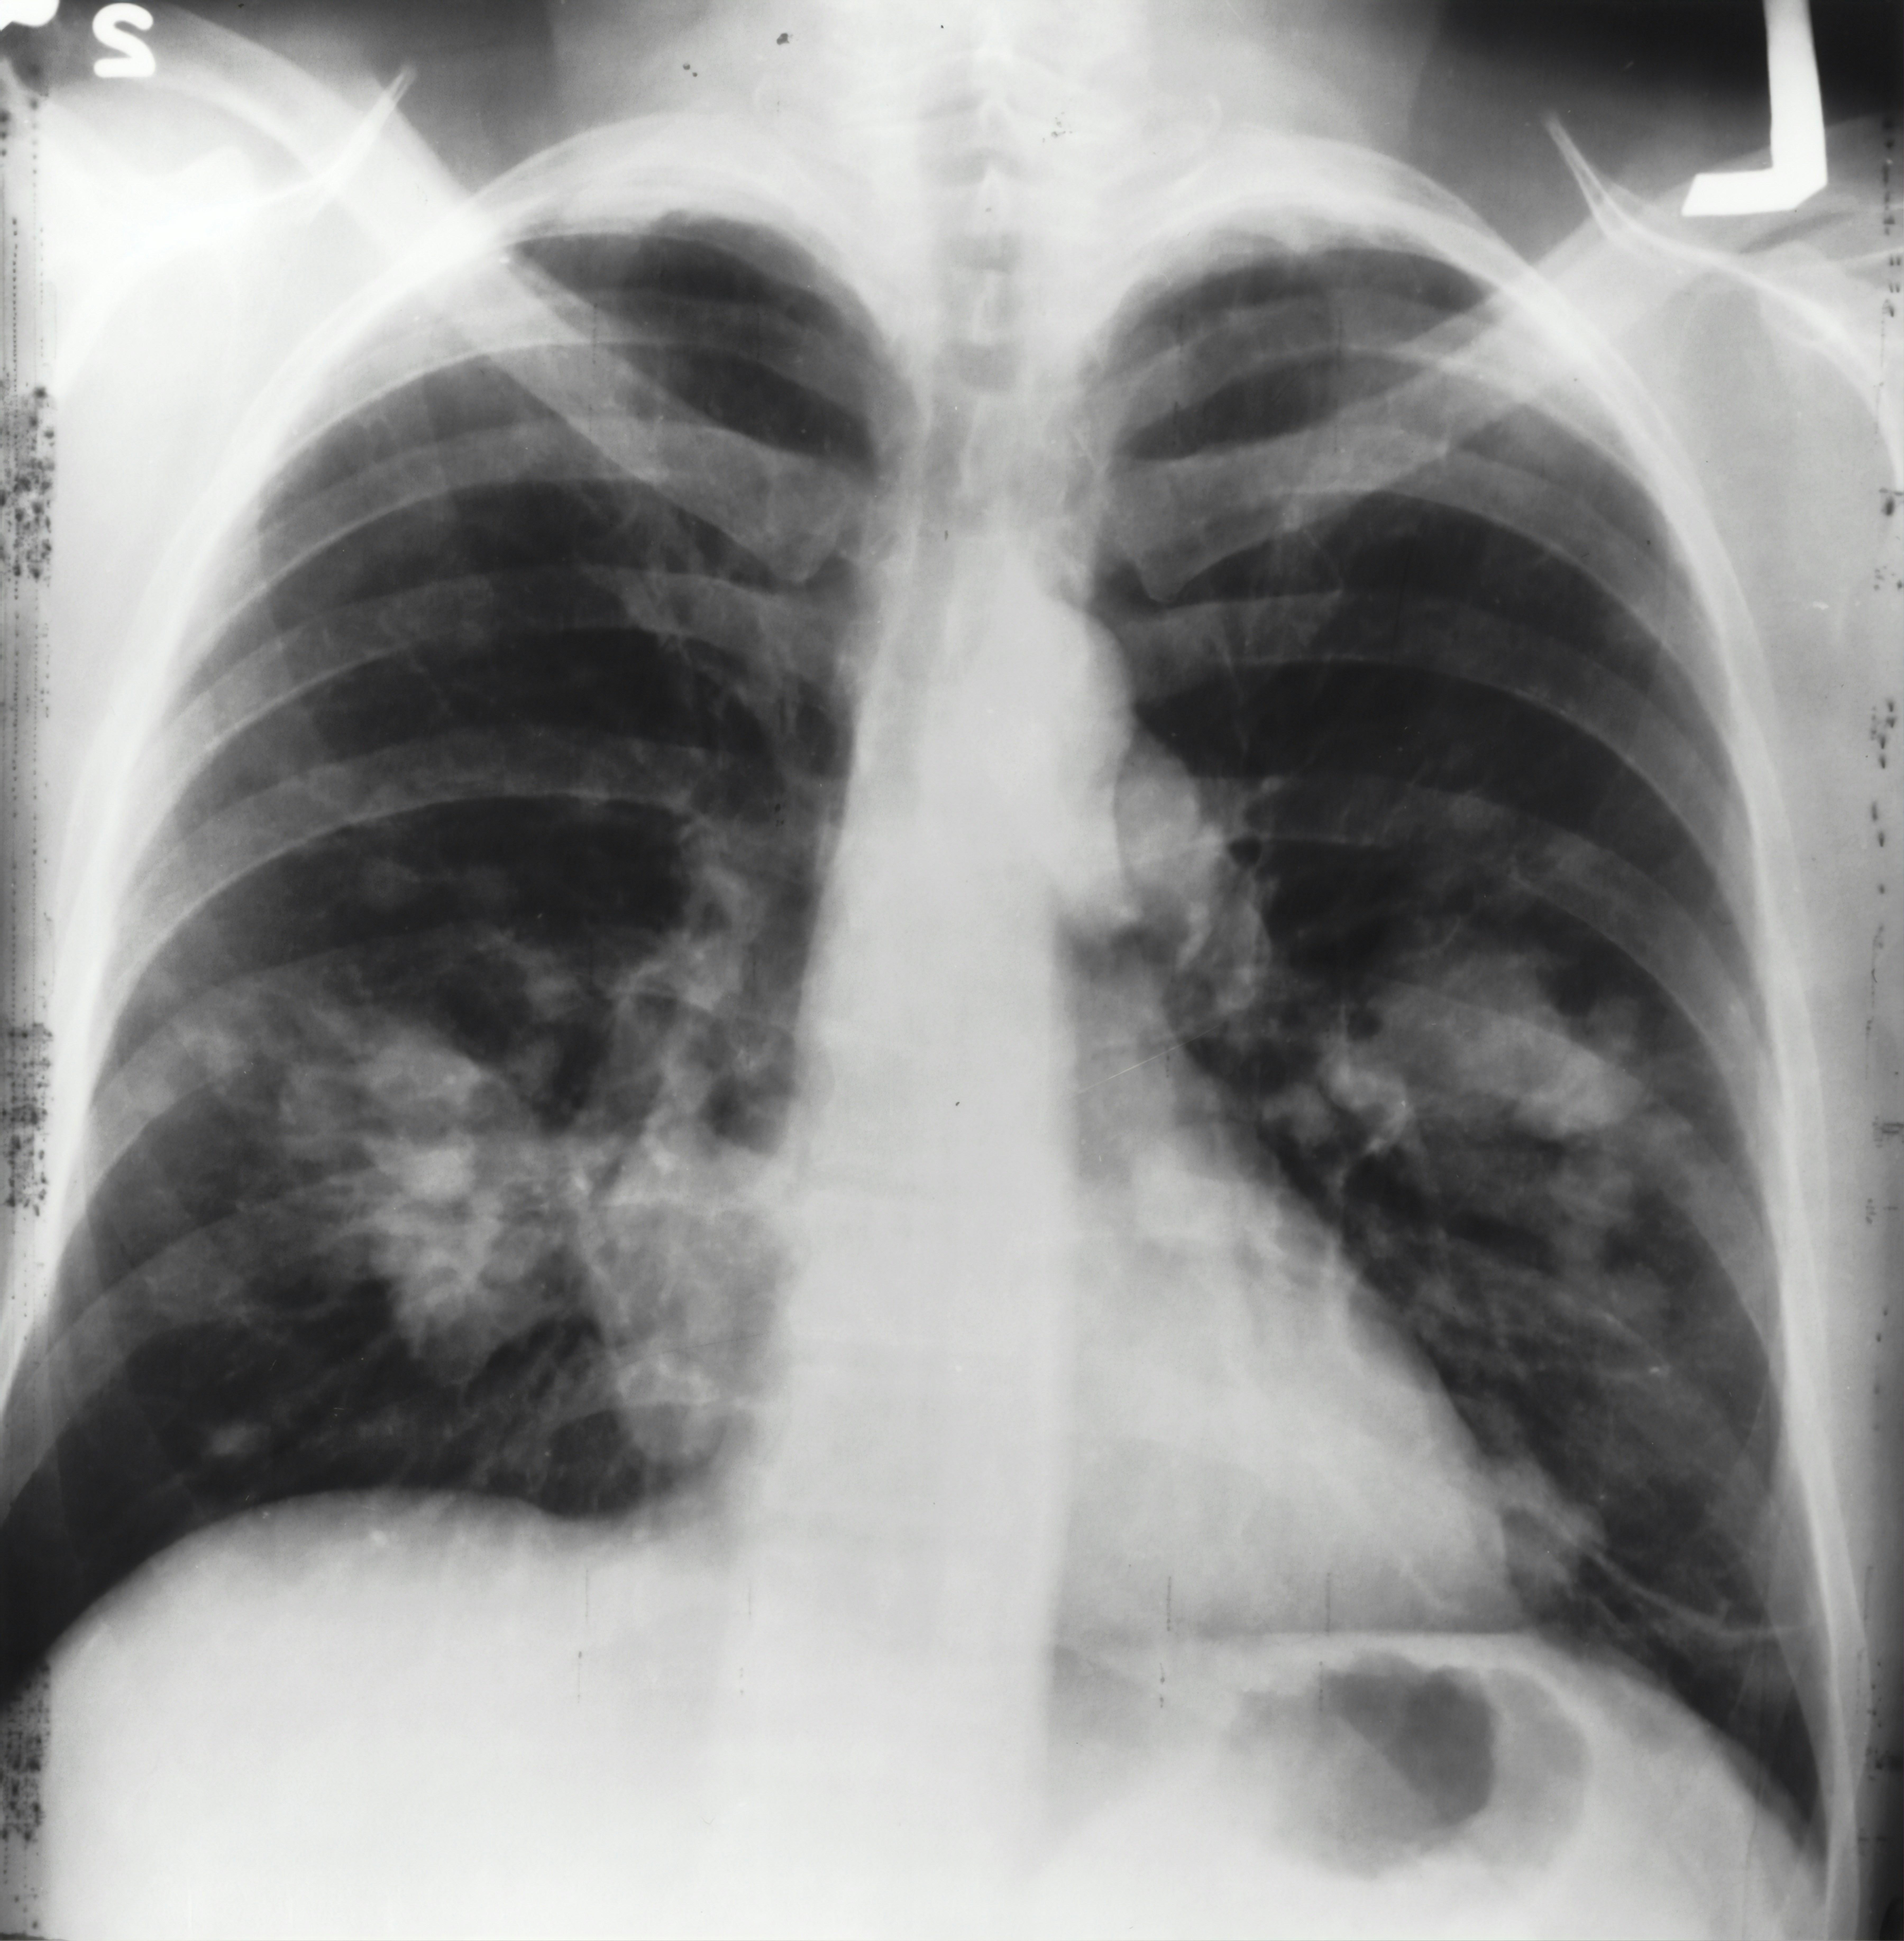 X-ray image of a pair of lungs